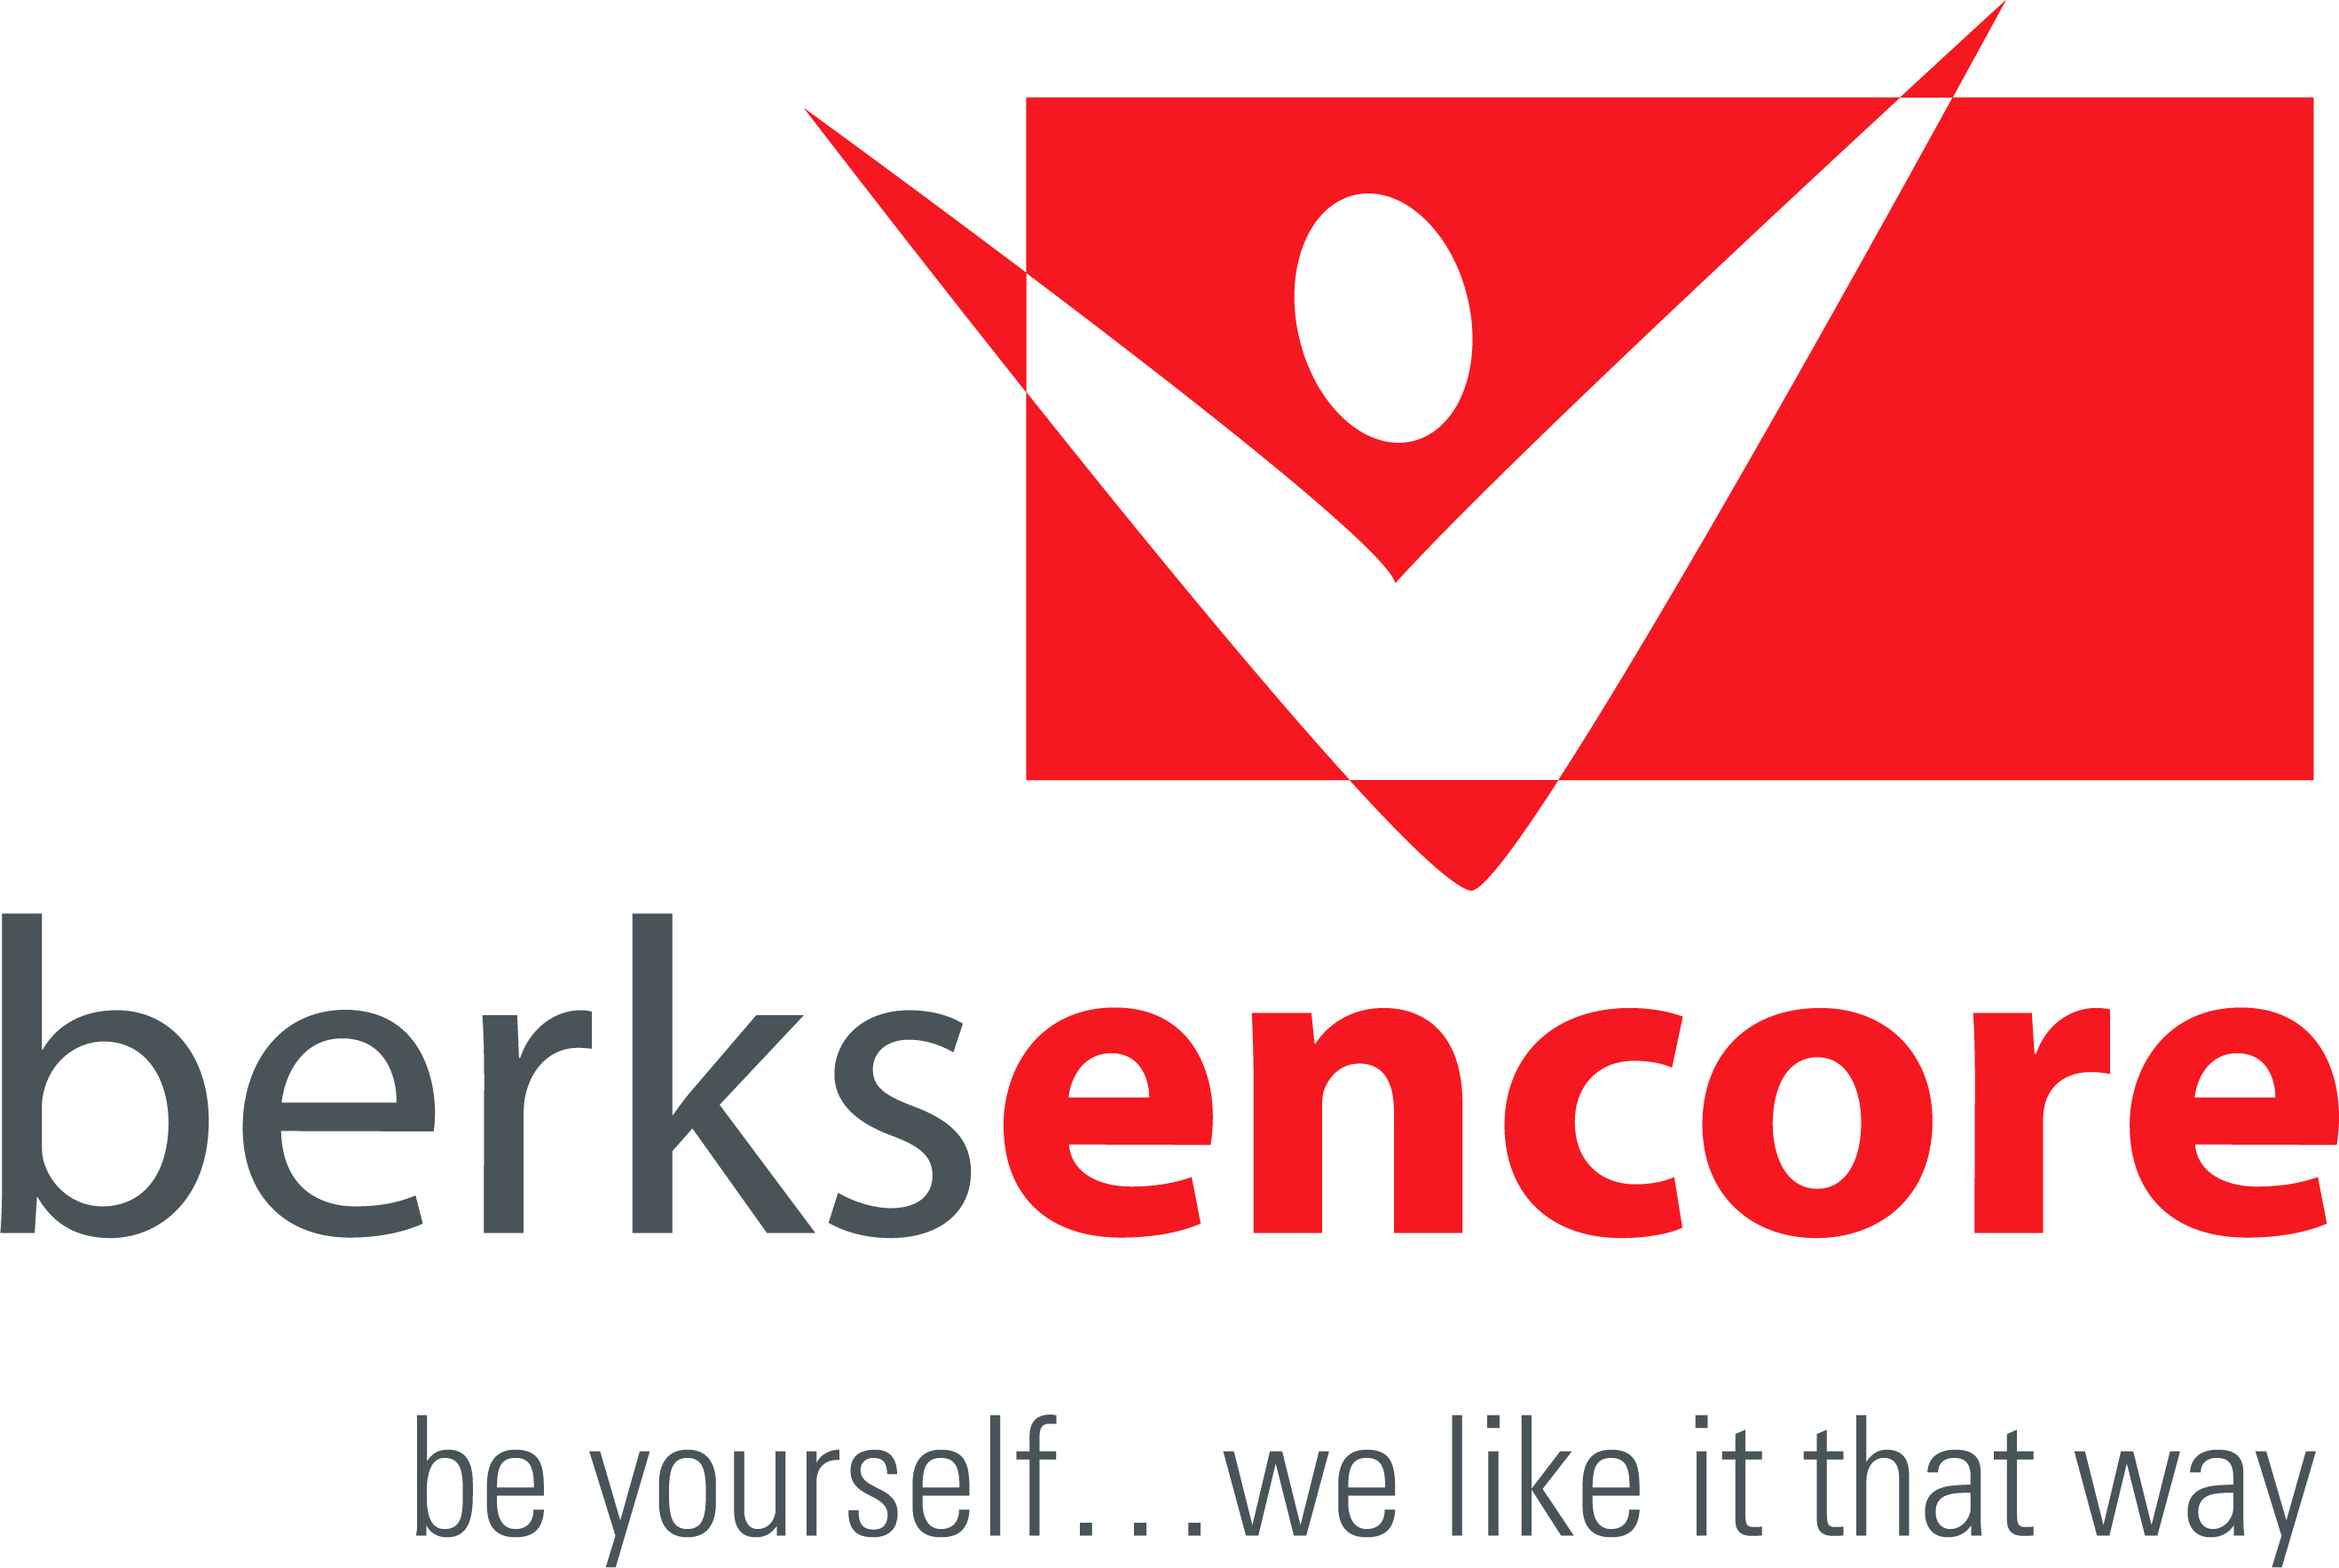 berks encore logo, senior services, be yourself we like it that way